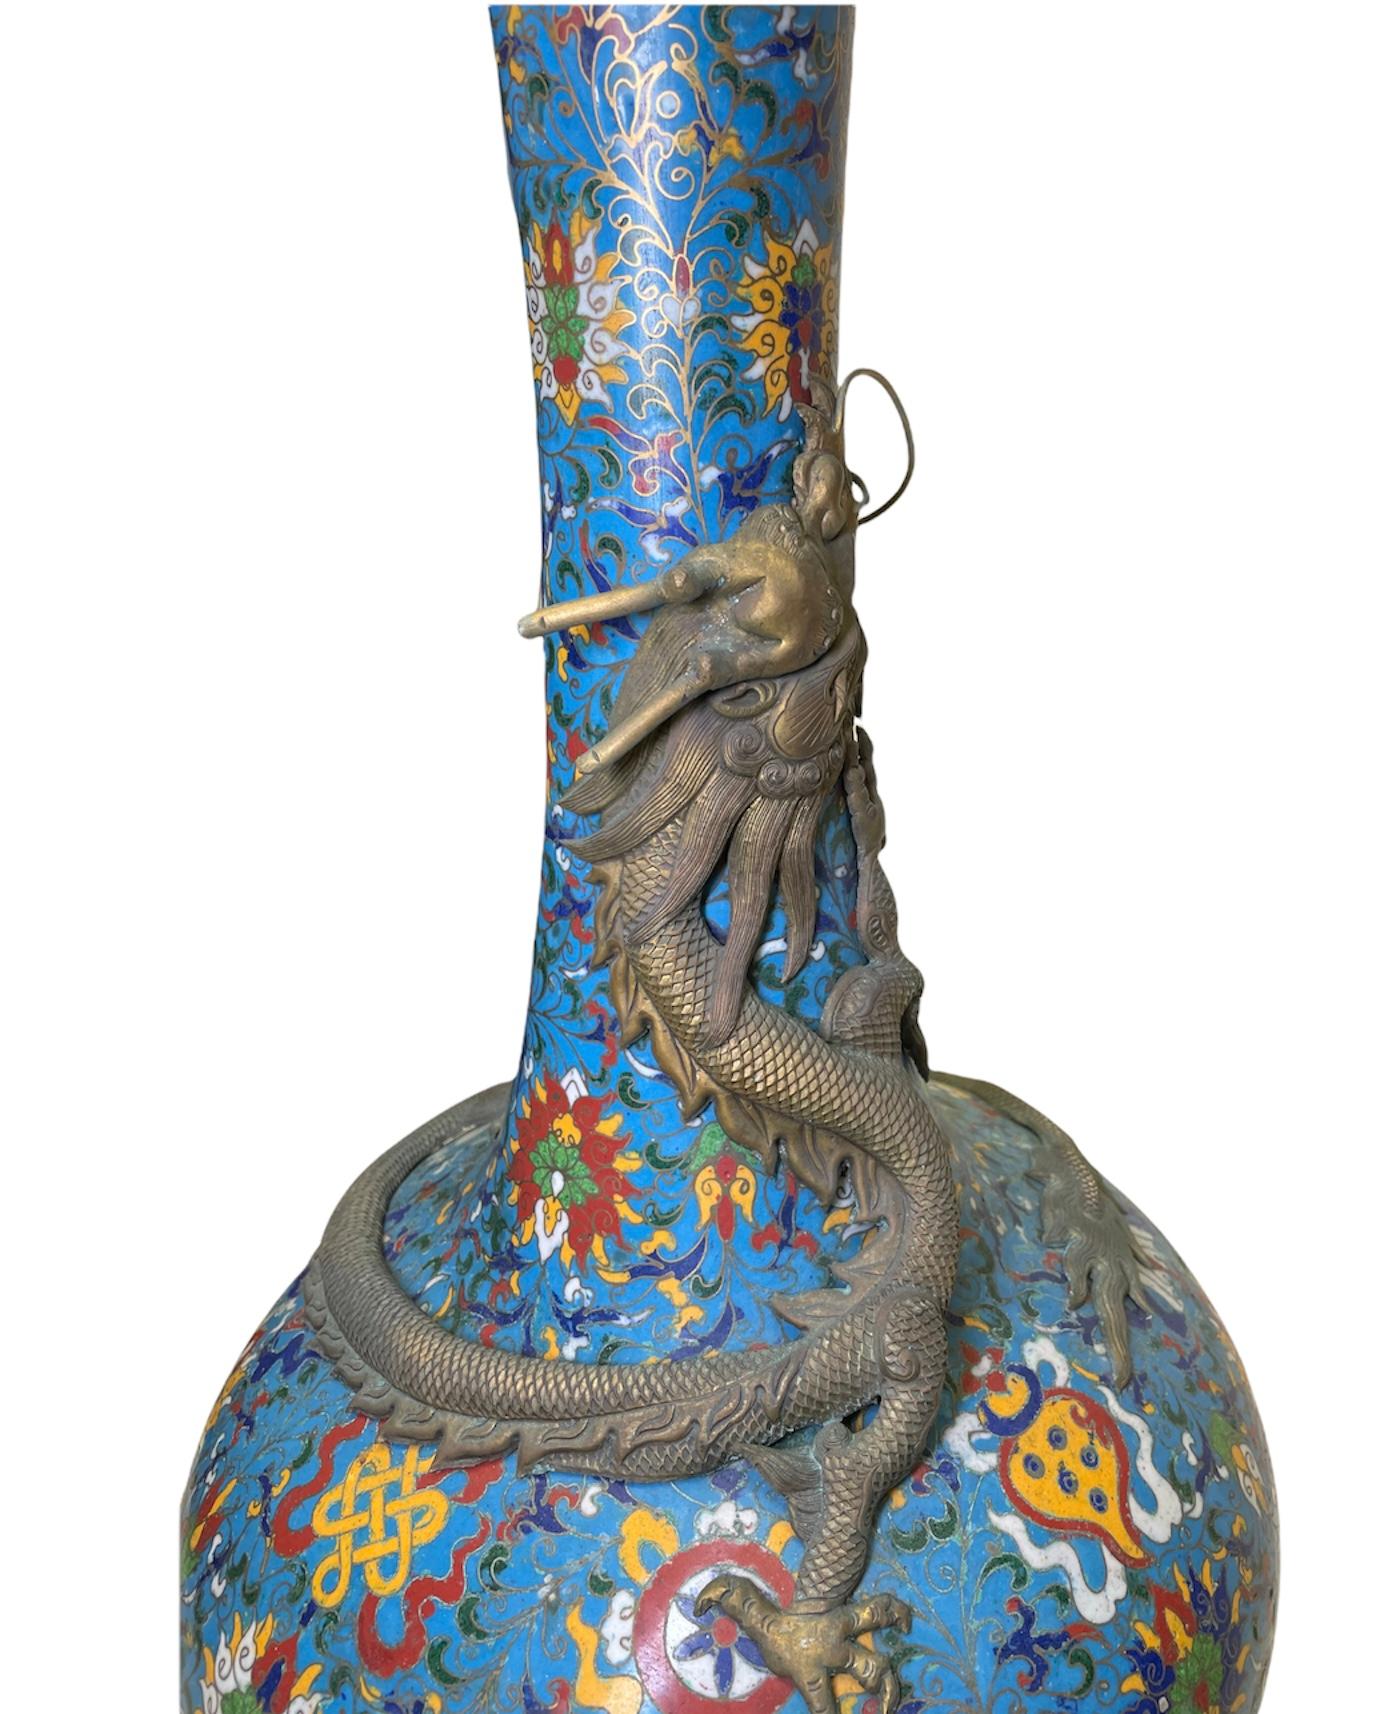 Metal Rare Chinese Large and Long Cloisonné Urn Vase